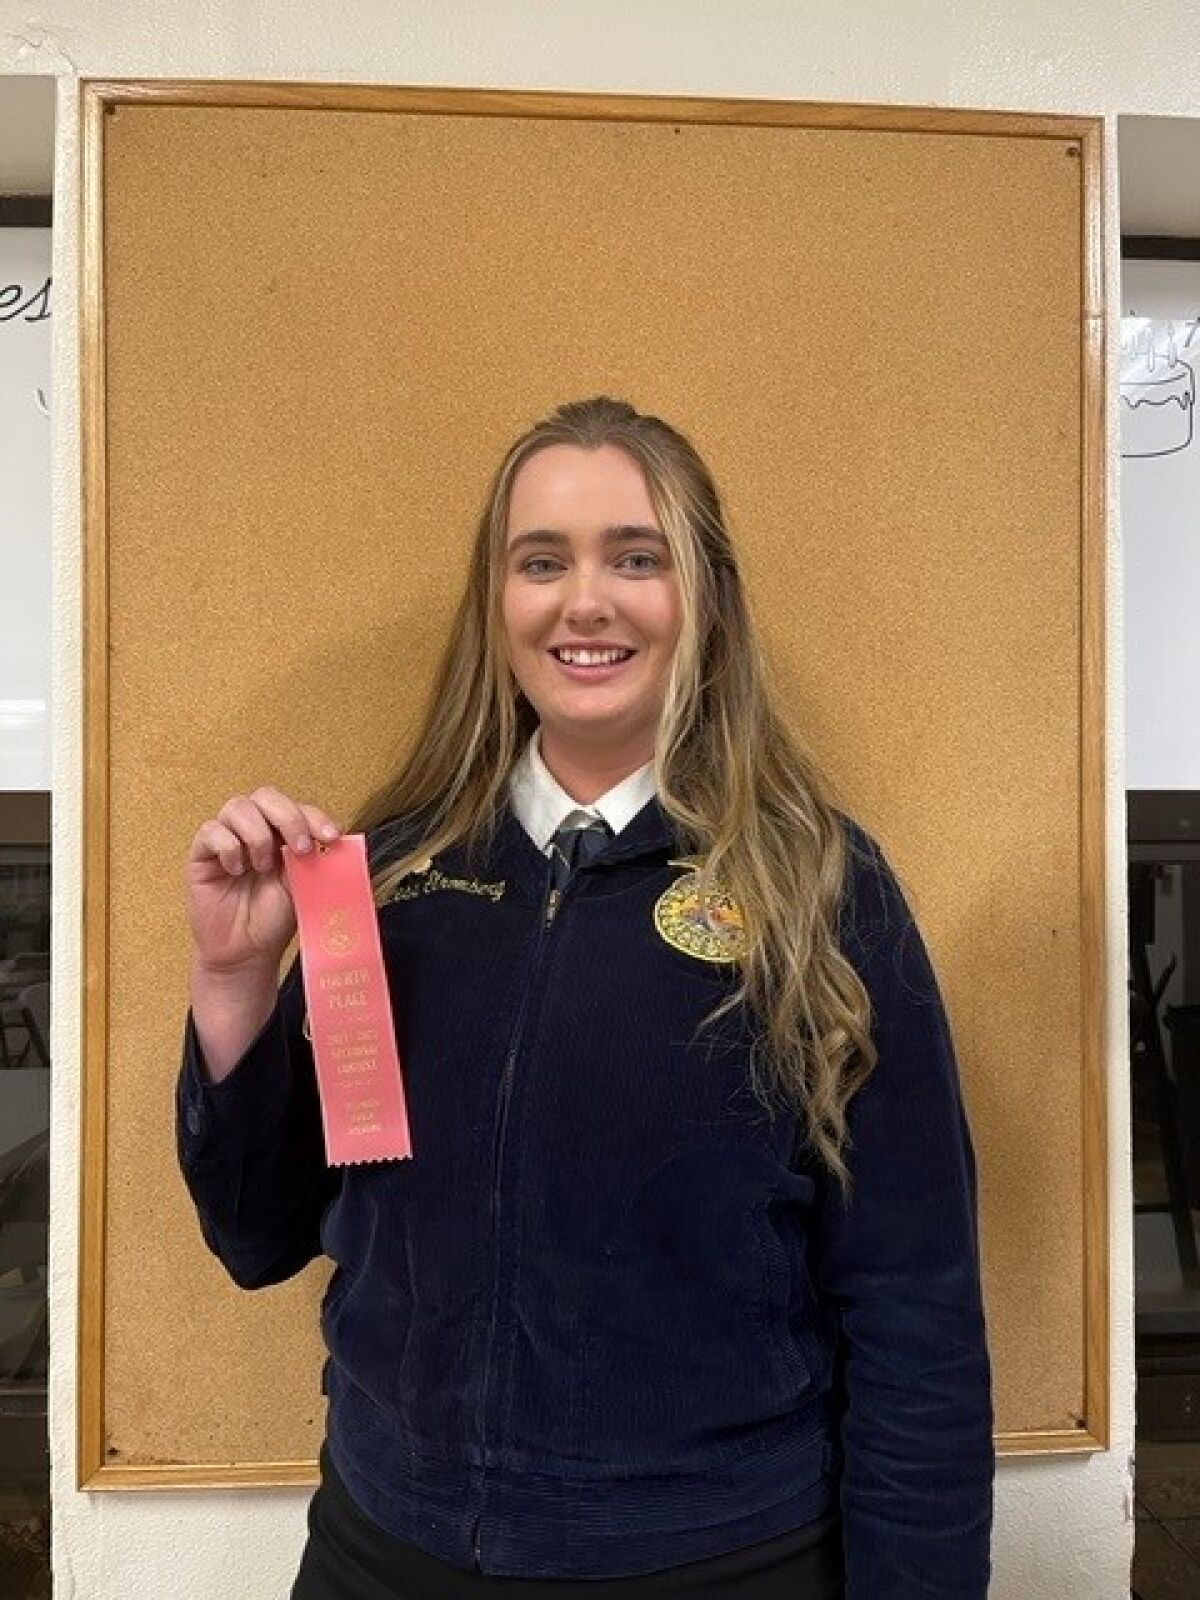 Francess Stromberg placed 4th overall in Prepared Speech in the San Diego Section FFA Public Speaking Contests.